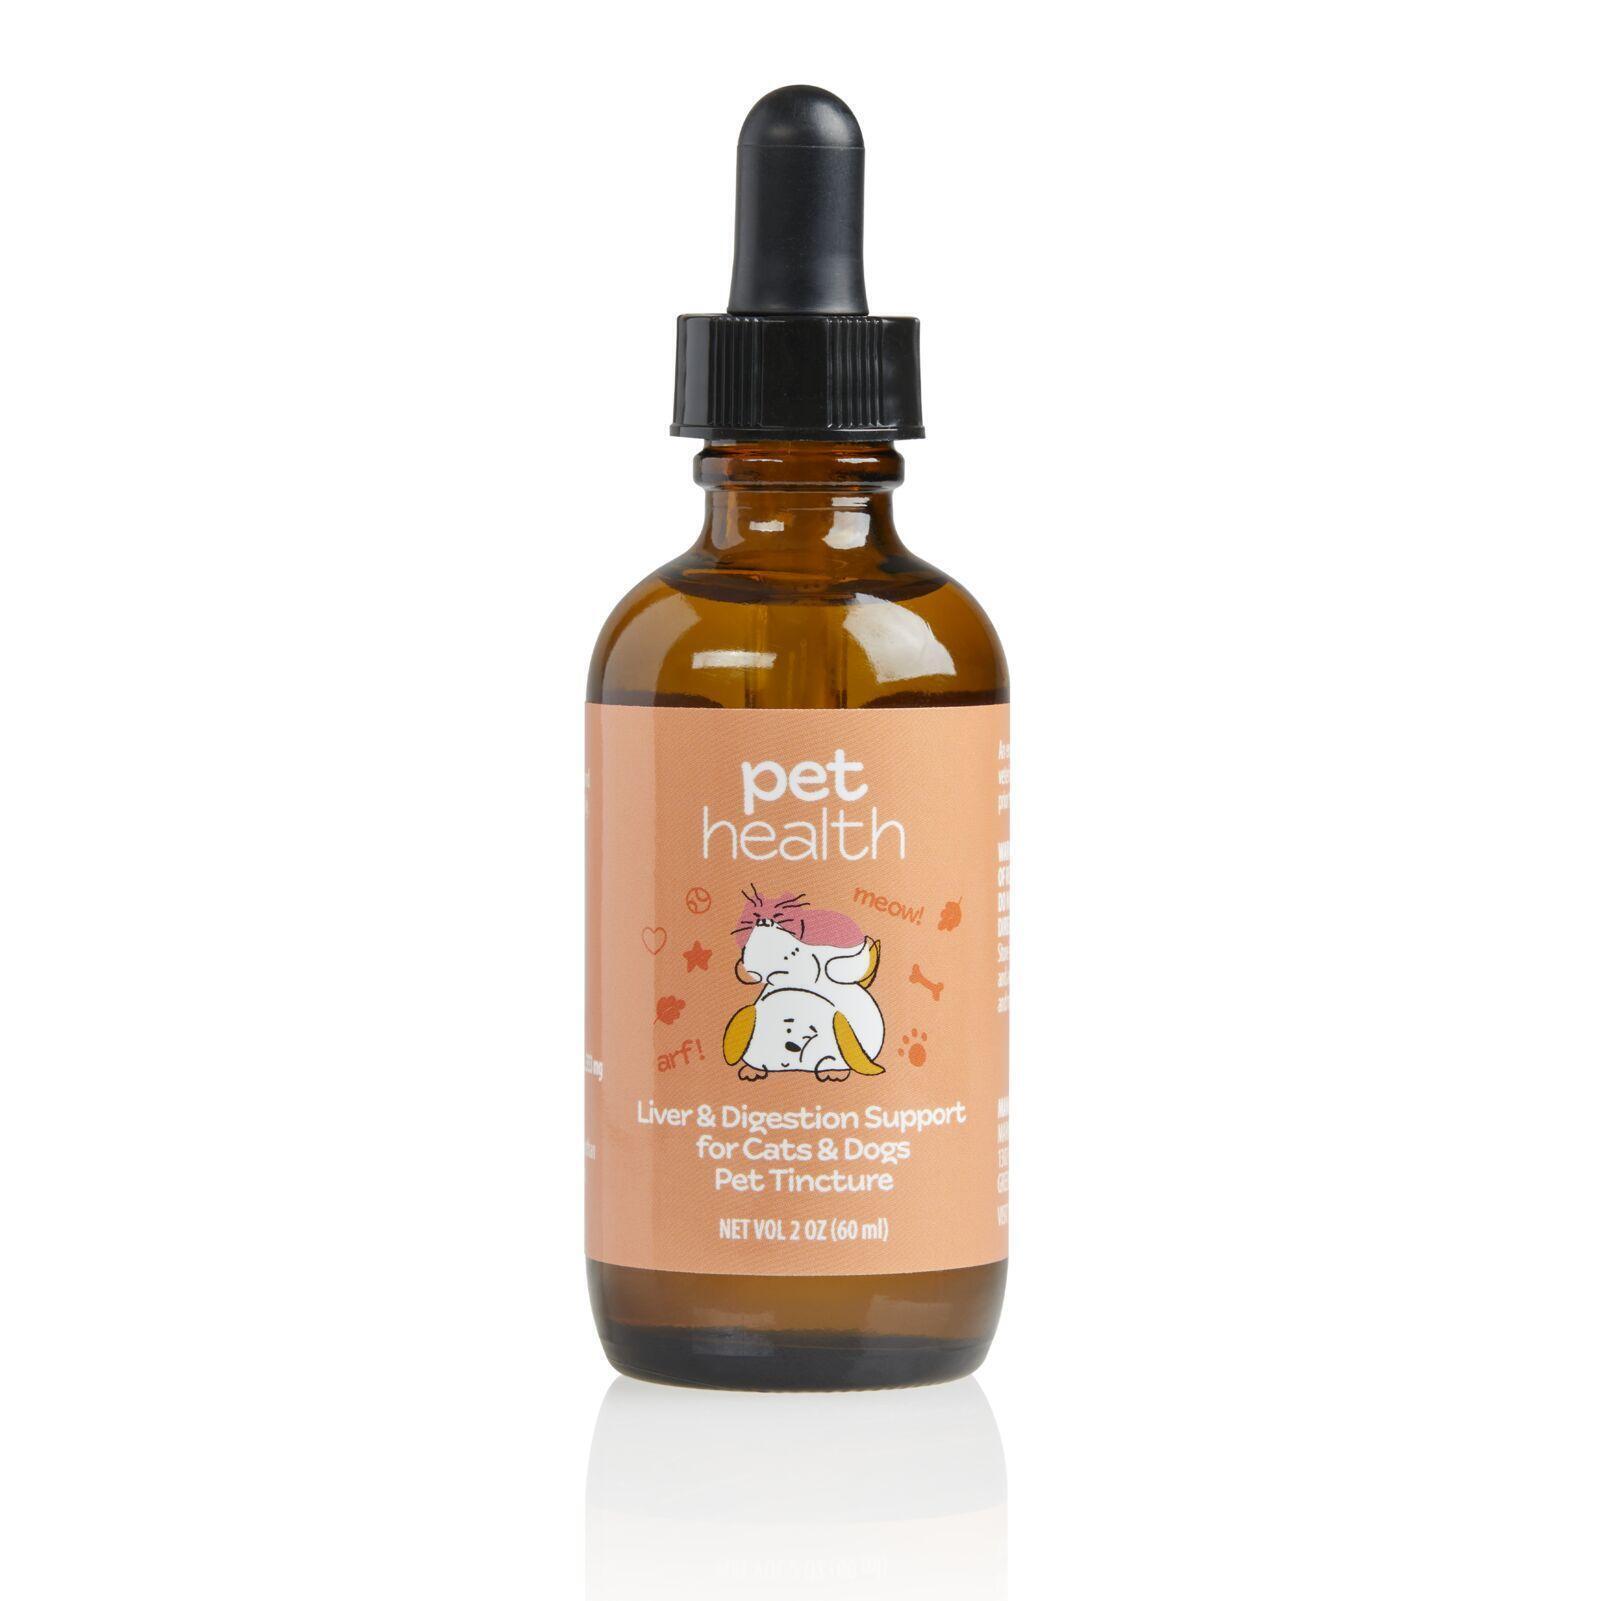 Pet Health Liver & Digestion Support for Cats & Dogs